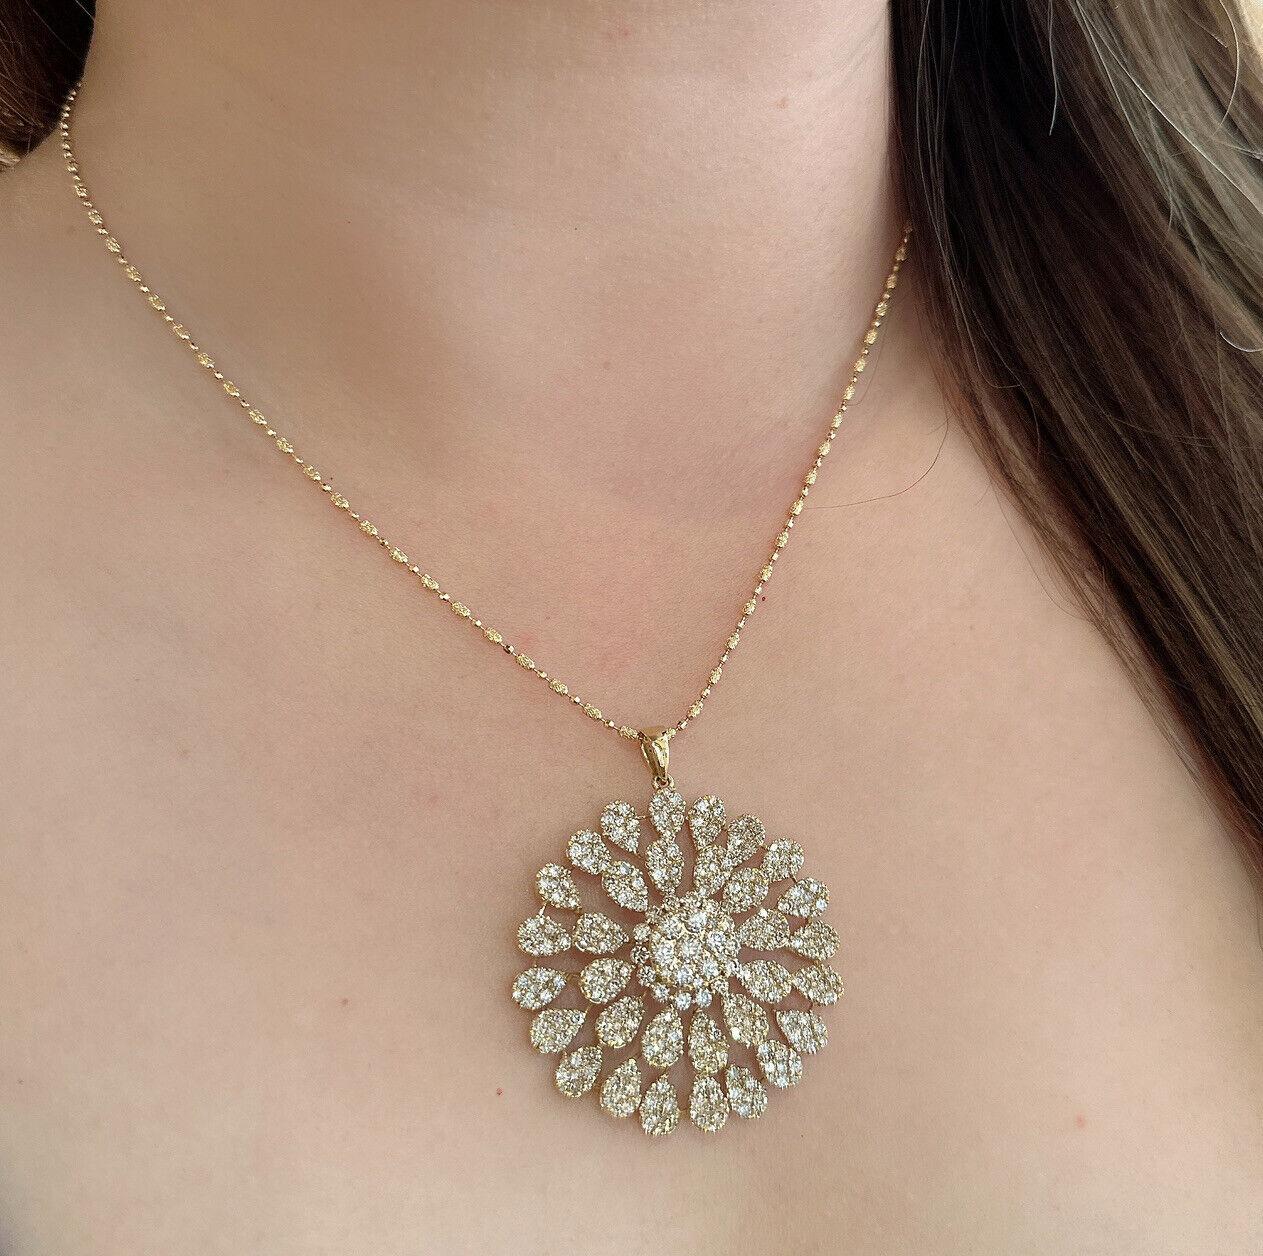 6.50 Carat Pave Diamond Flower Medallion Pendant Necklace 18k Yellow Gold 

Diamond Star Pendant Necklace features a Large Star Medallion with a total of 6.50 carats of Champagne-colored Round Brilliant Diamonds Pavé set in 18k Yellow Gold. The